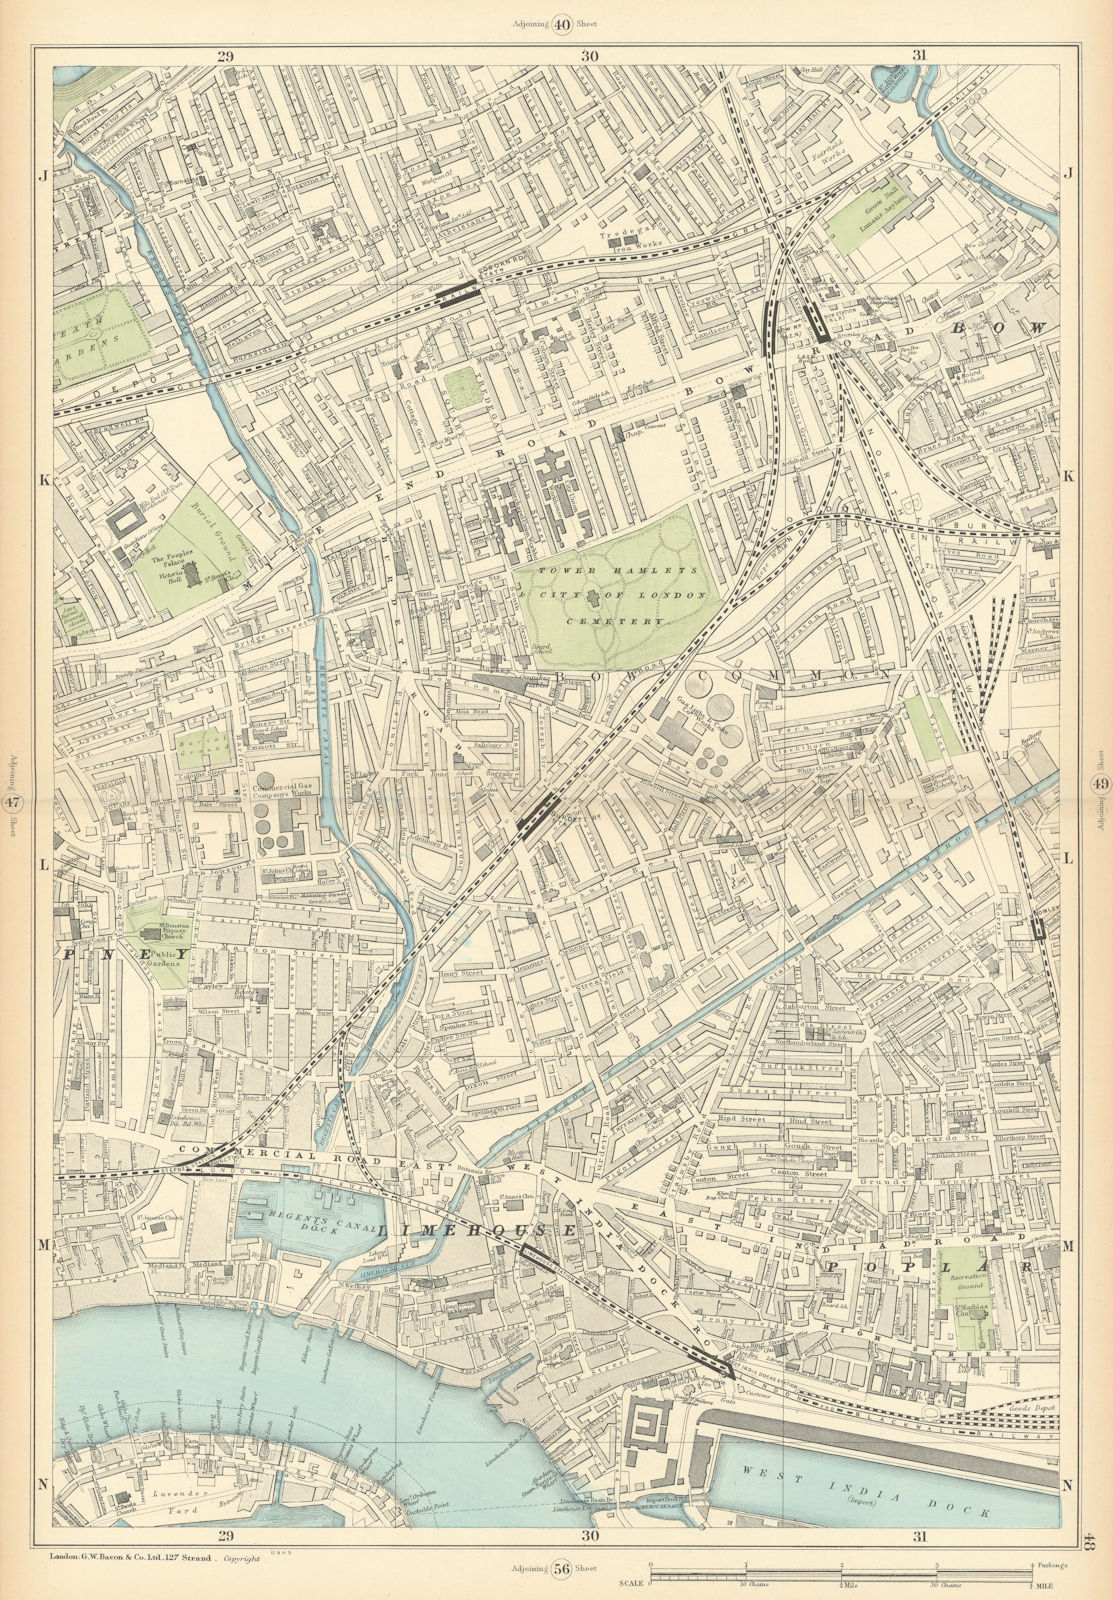 Associate Product TOWER HAMLETS Bow Poplar Stepney Limehouse Mile End Bromley 1900 old map